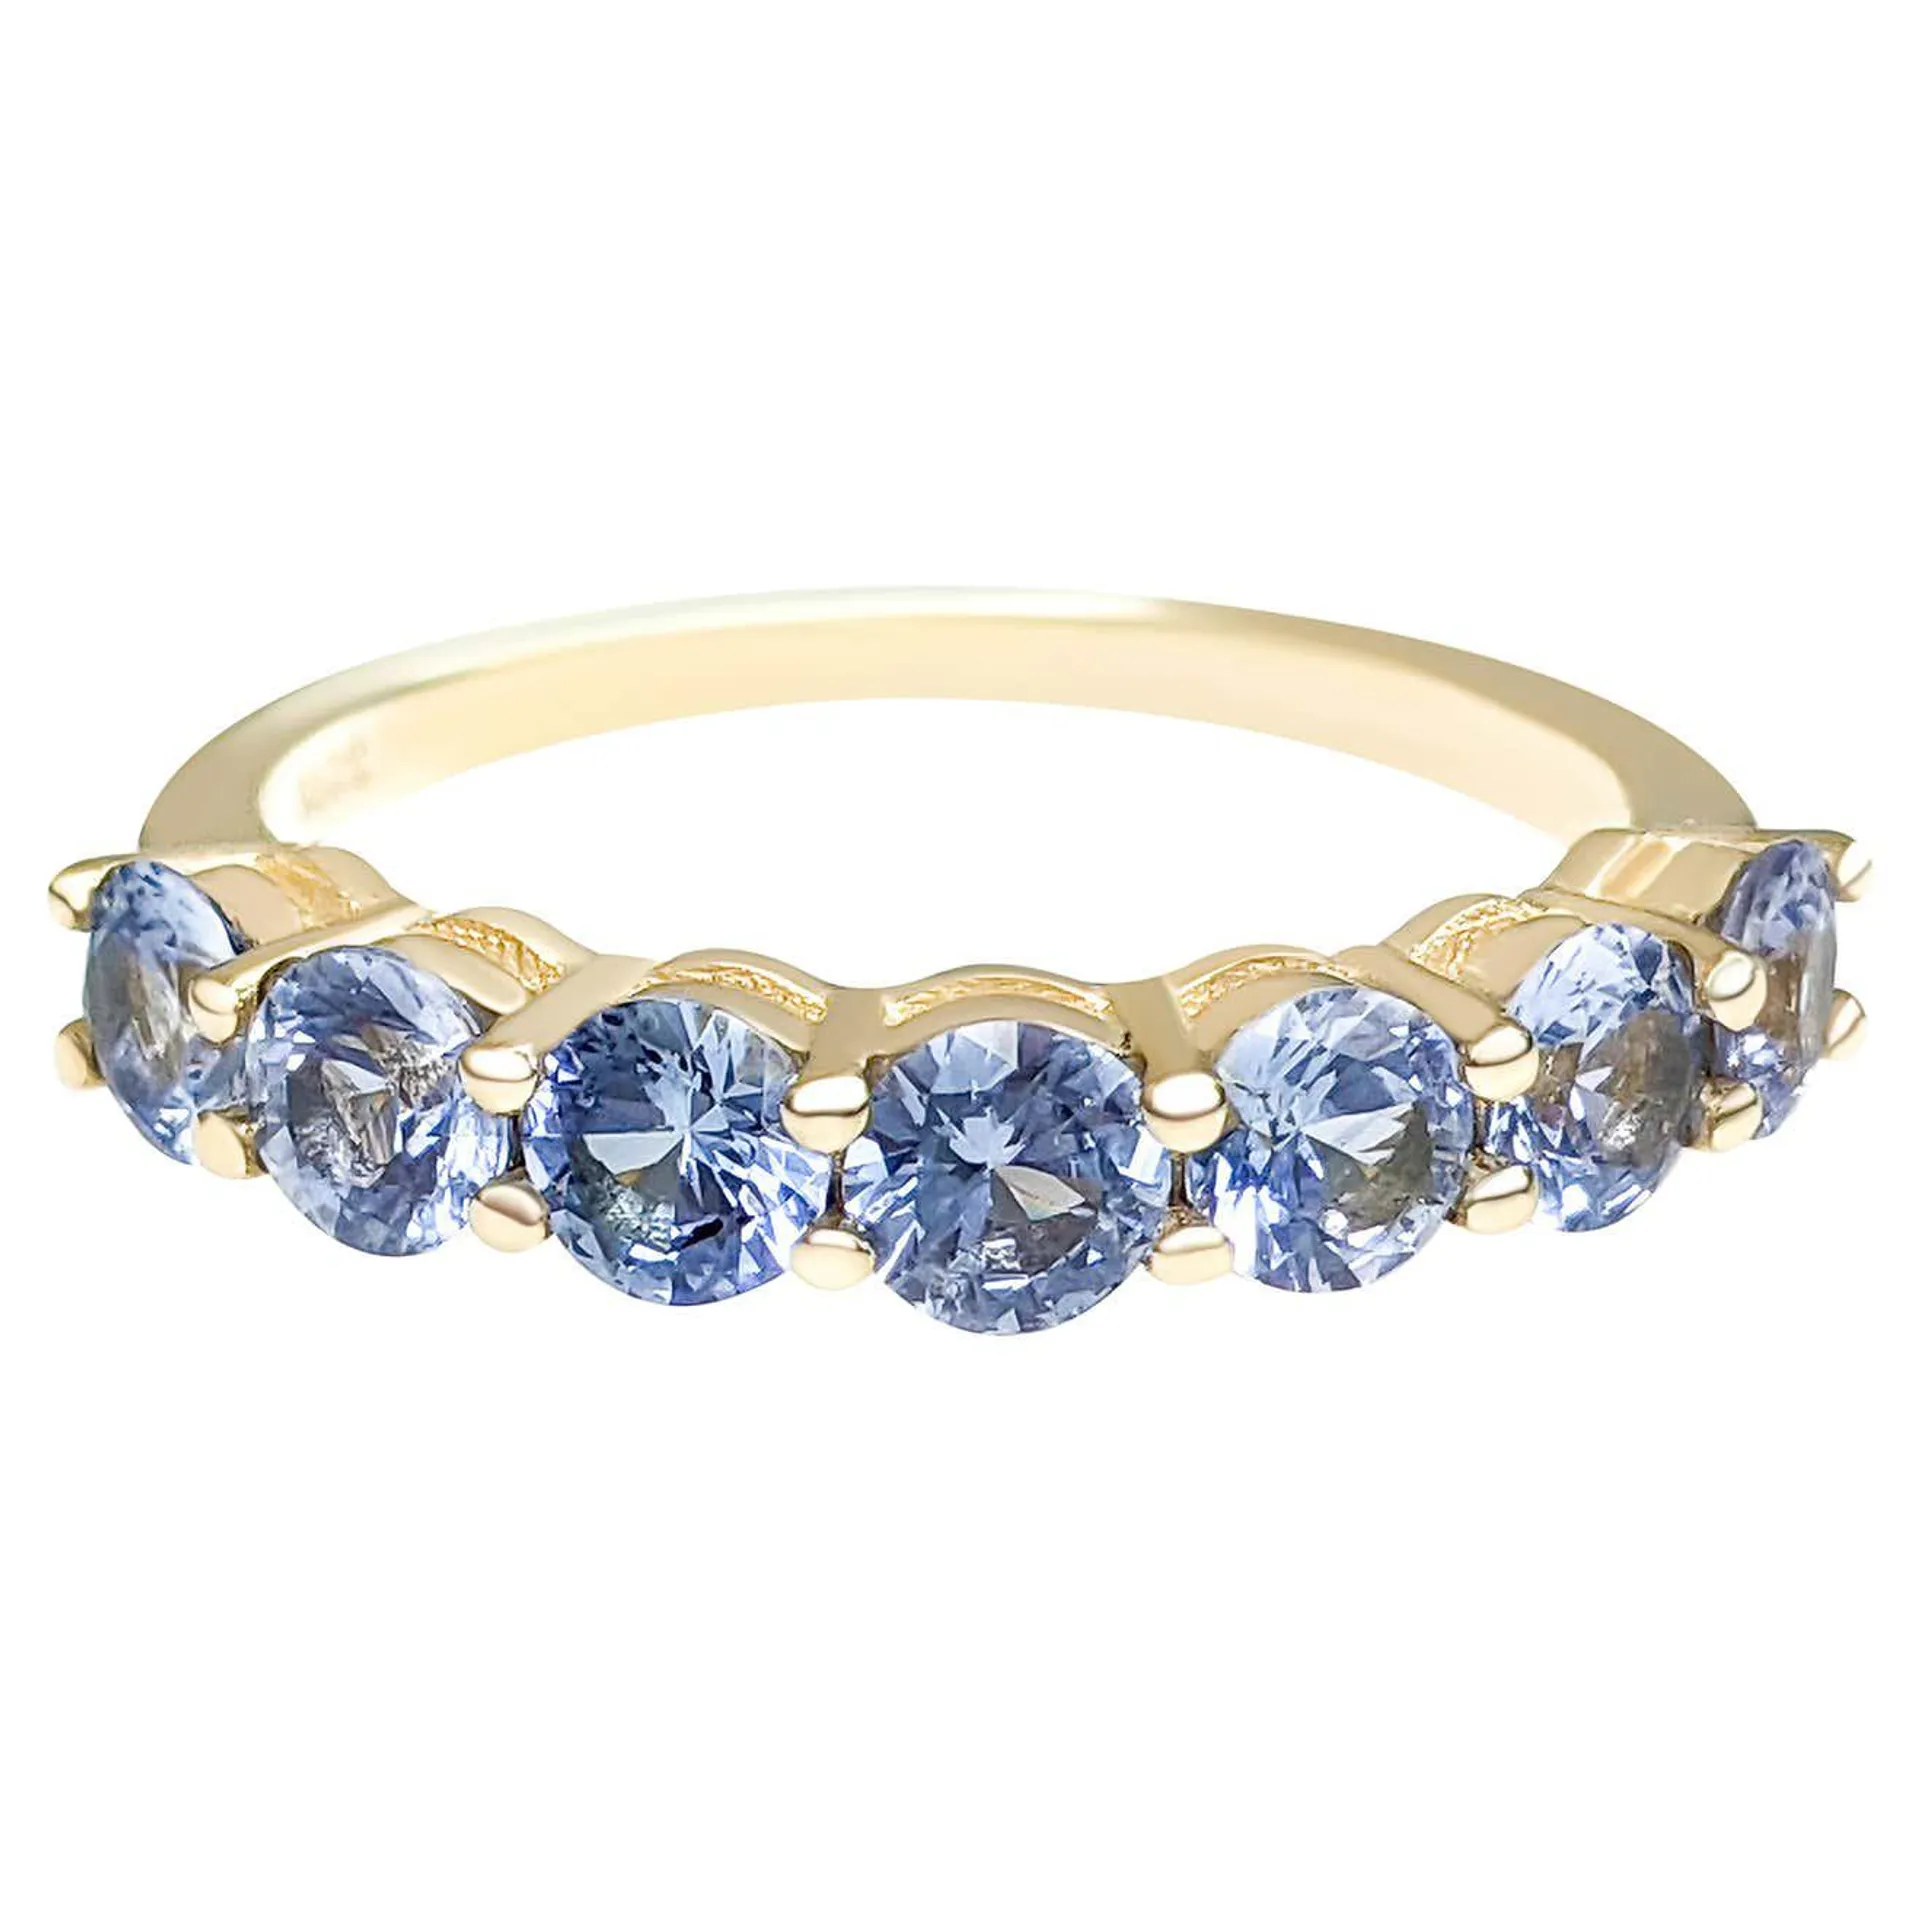 $1 NO RESERVE! 1.54ct Light Blue Sapphire Eternity Band, 14K Yellow Gold Ring